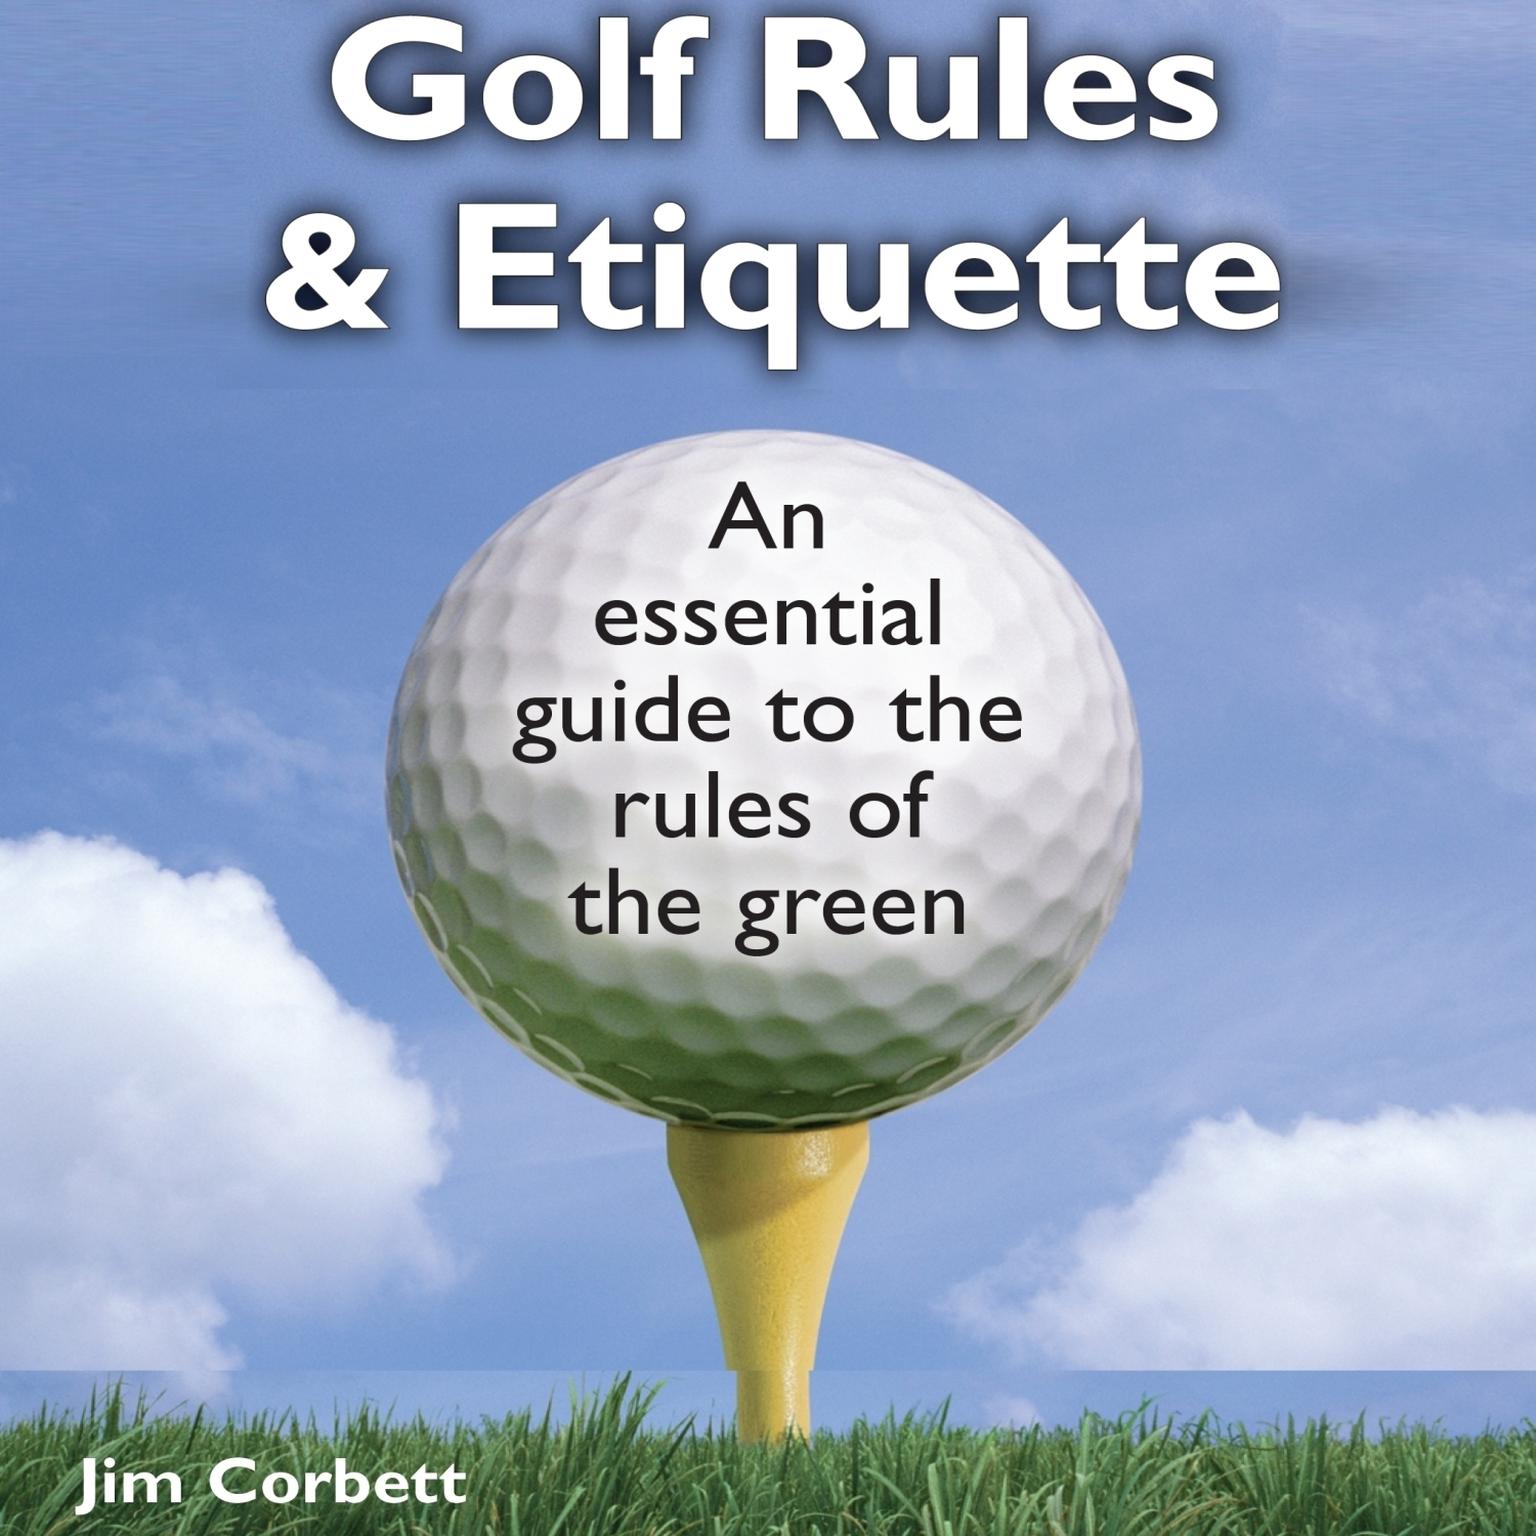 The Pocket Idiots Guide to Golf Rules and Etiquette (Abridged) Audiobook, by Jim Corbett